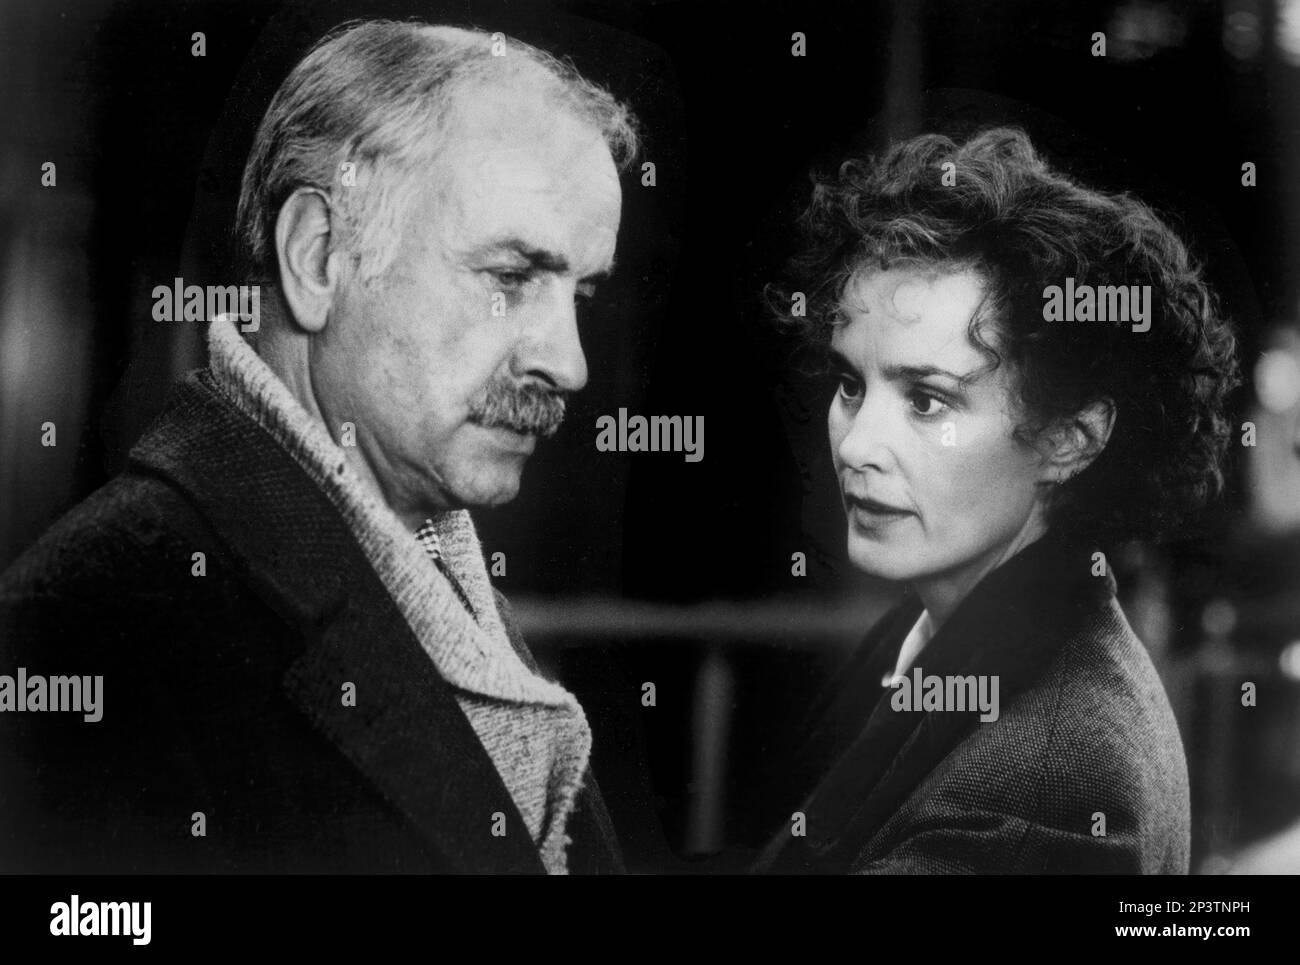 Armin Mueller-Stahl, Jessica Lange, on-set of the Film, 'Music Box', Tri-Star Pictures, 1989 Foto Stock